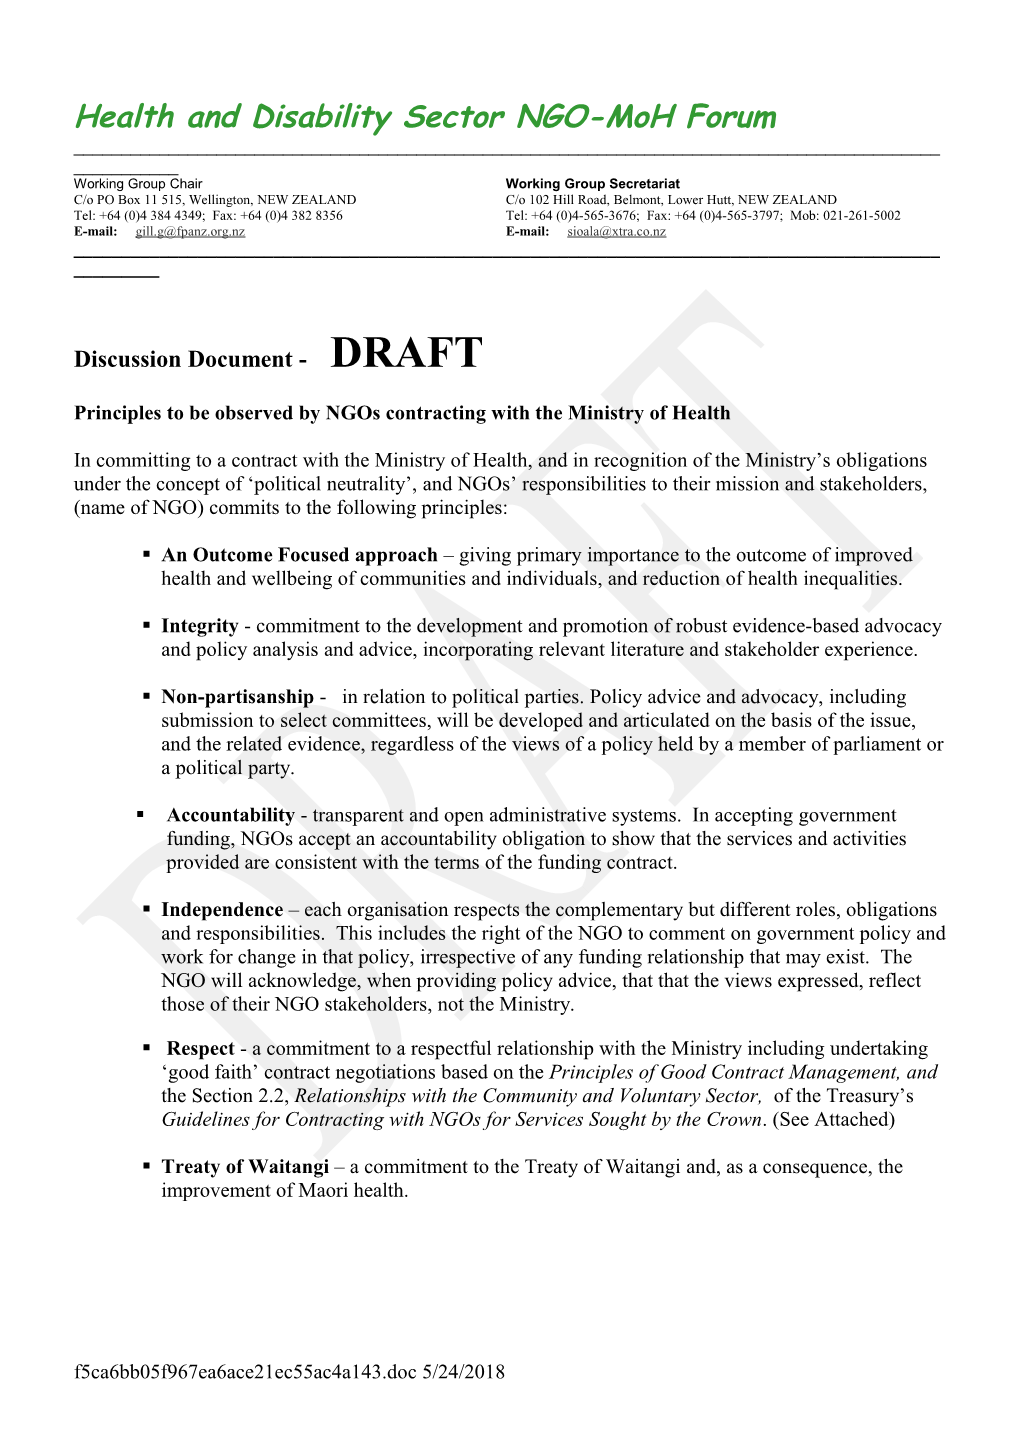 Discussion Document - DRAFT